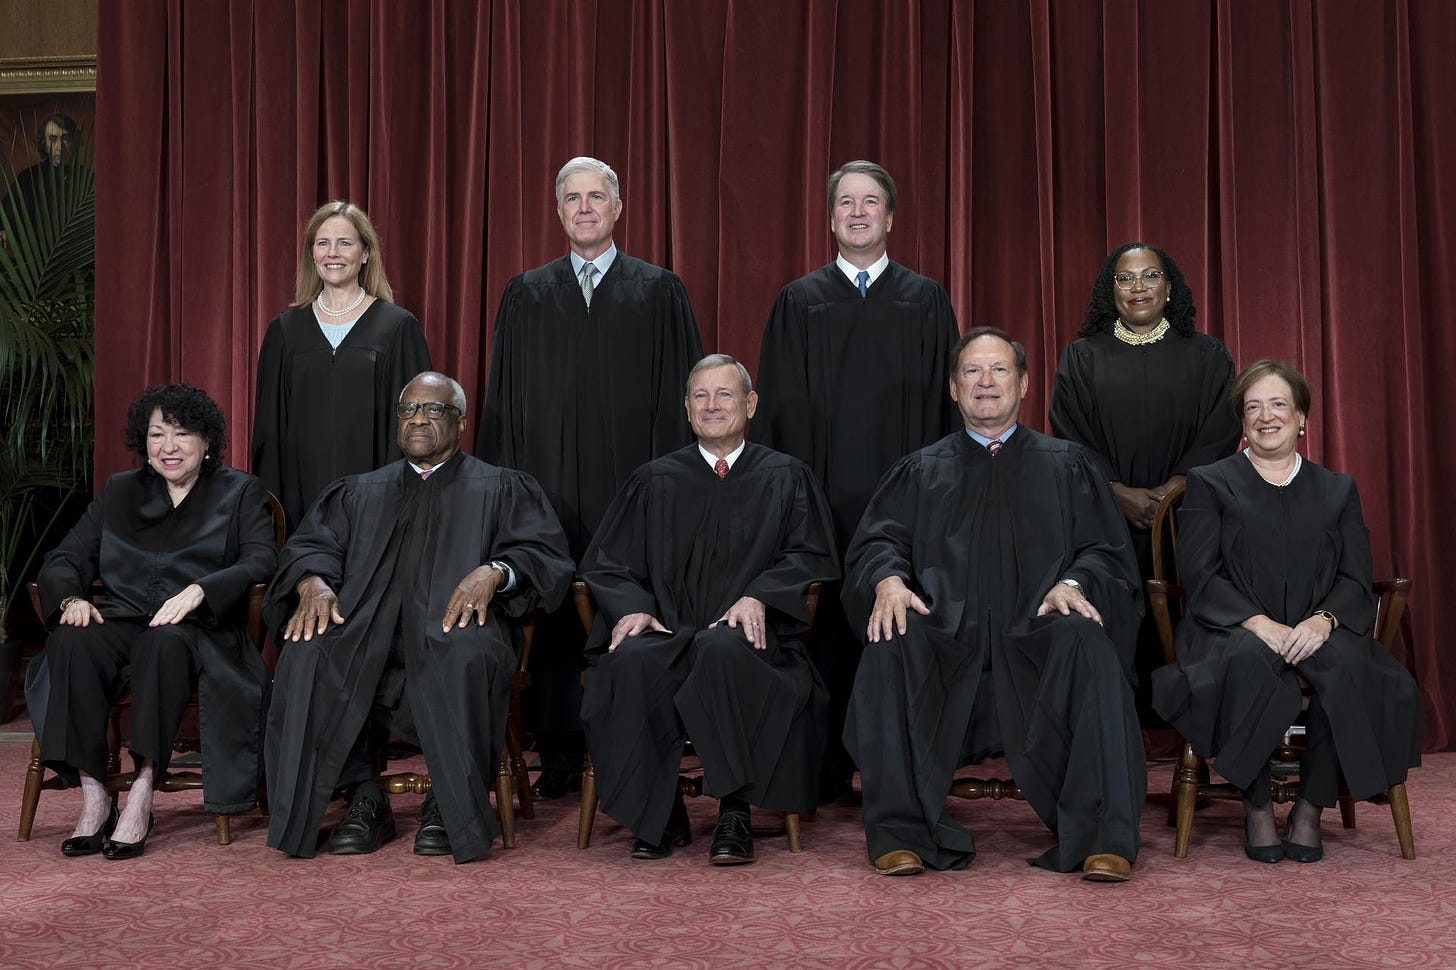 Members of the Supreme Court sit for a group portrait.